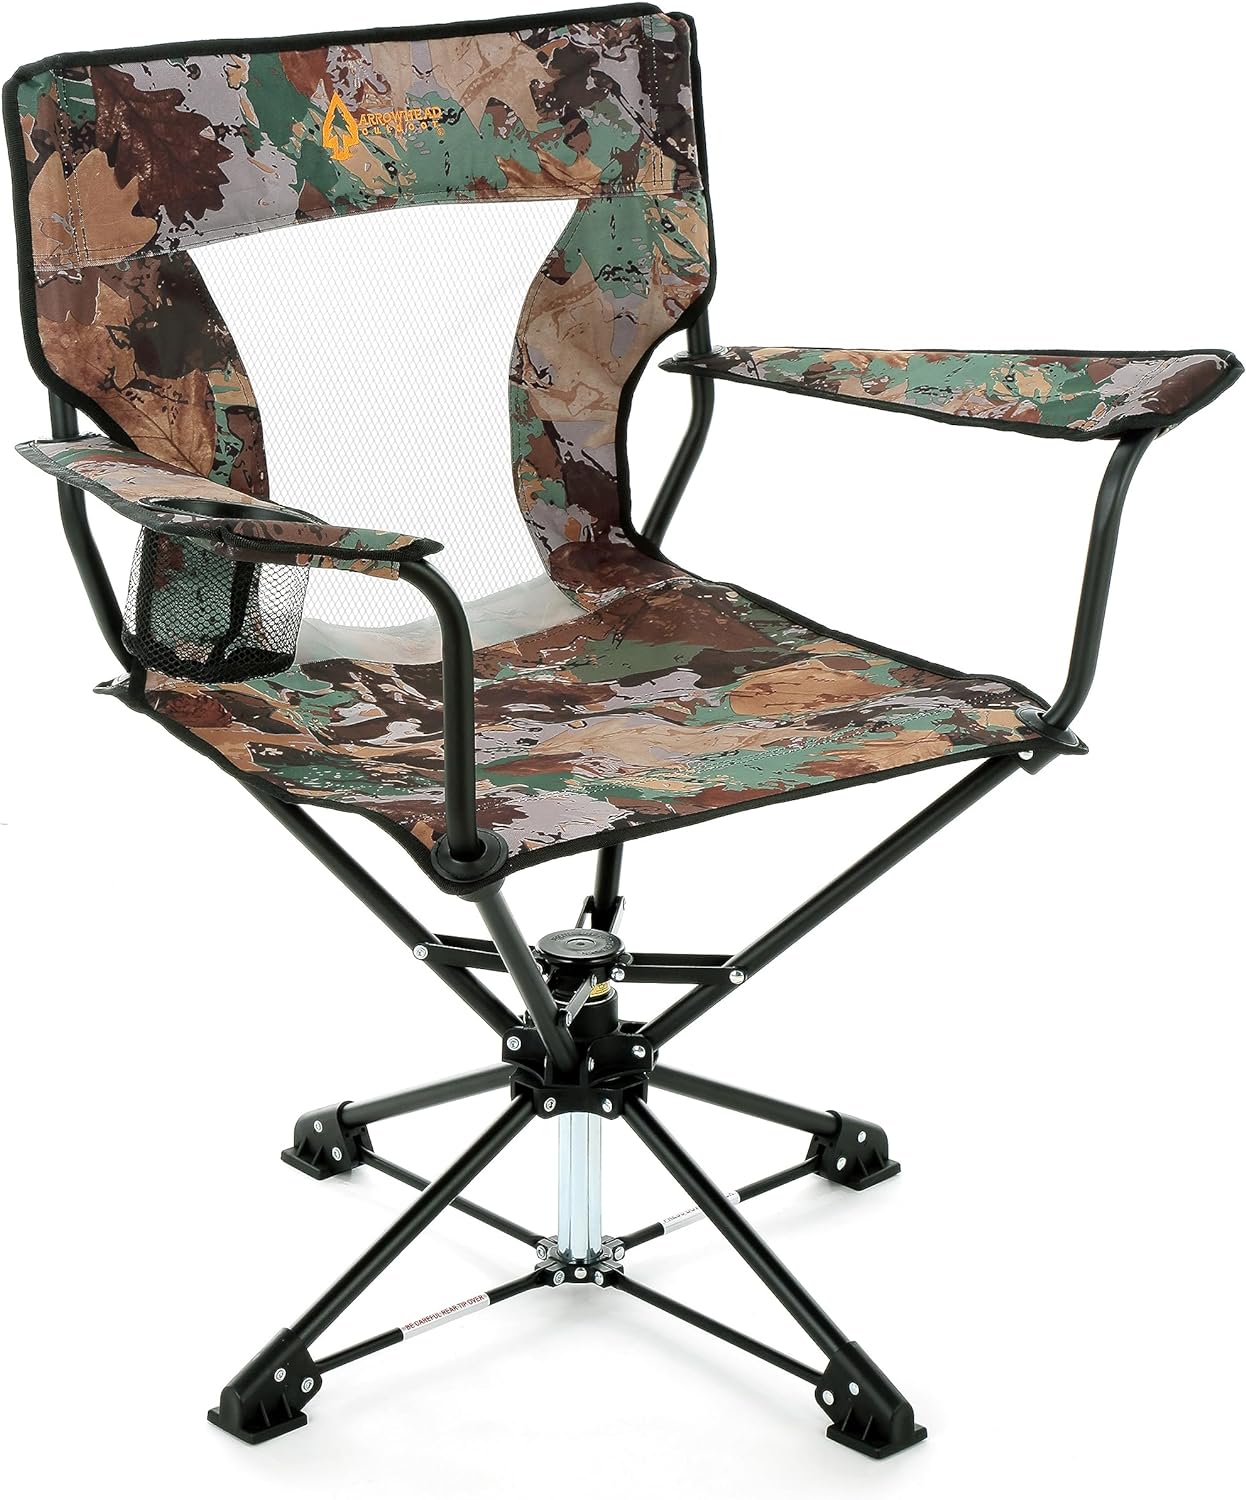 360° Degree Swivel Hunting Chair with Armrests – Arrowhead Outdoor